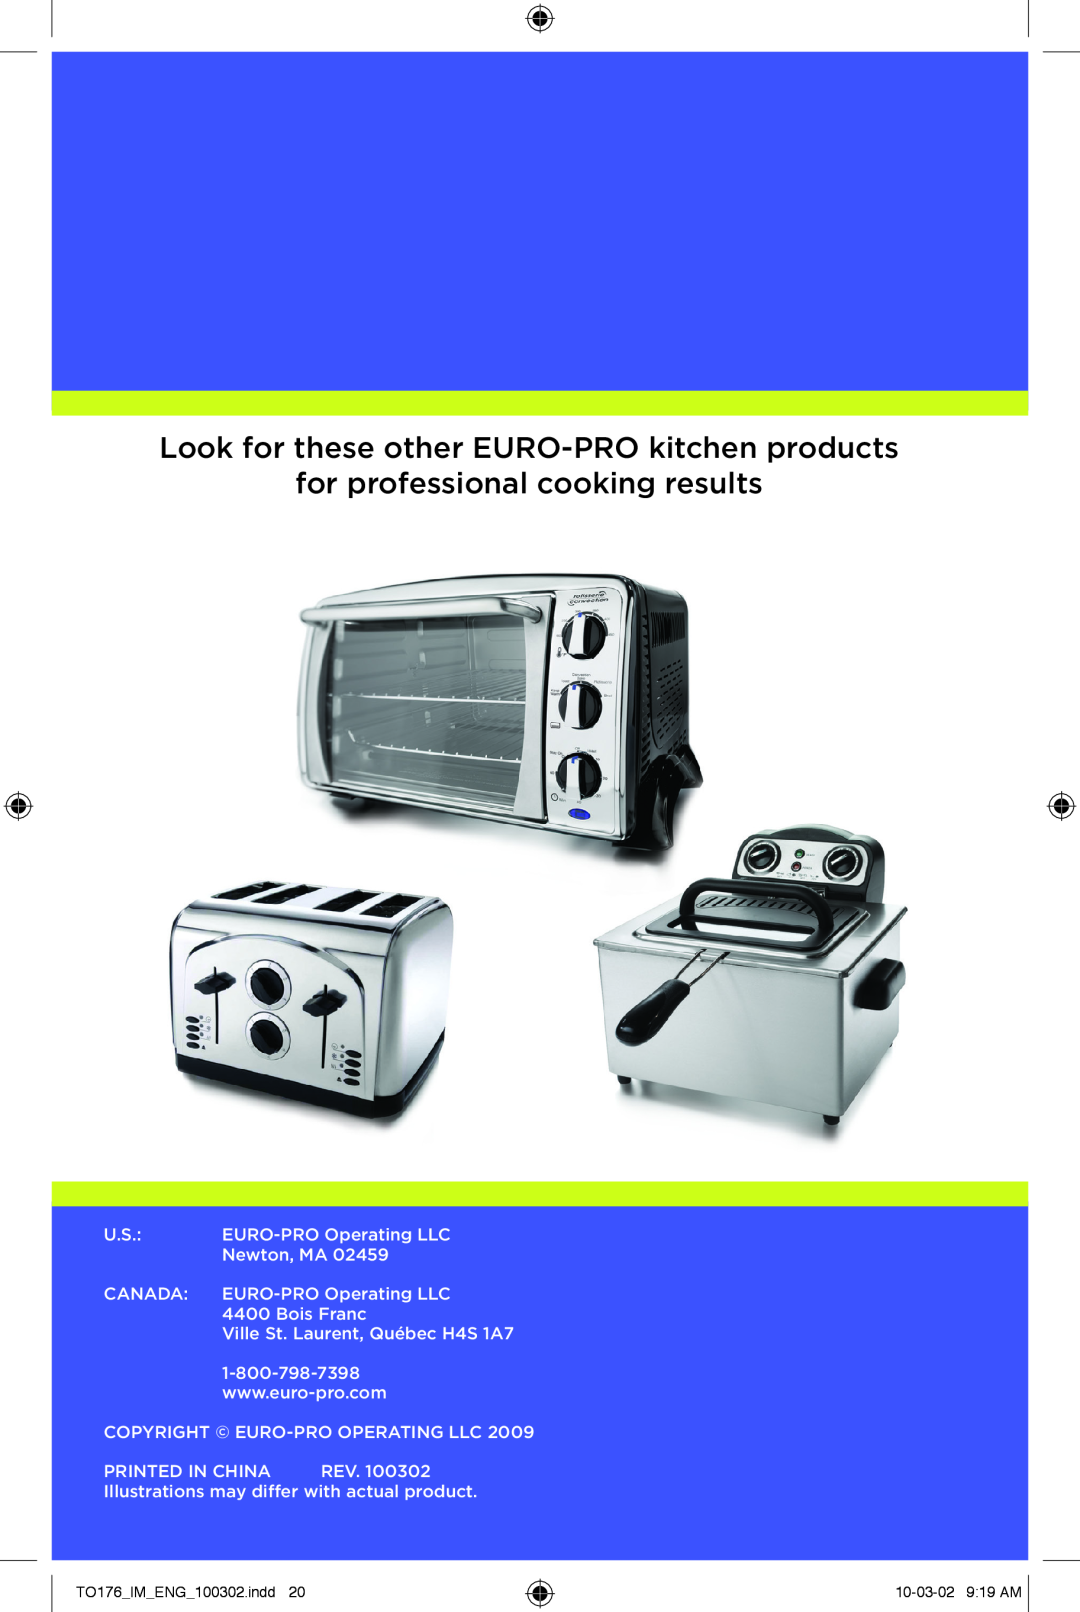 Euro-Pro TO176 manual Look for these other EURO-PROkitchen products, for professional cooking results 